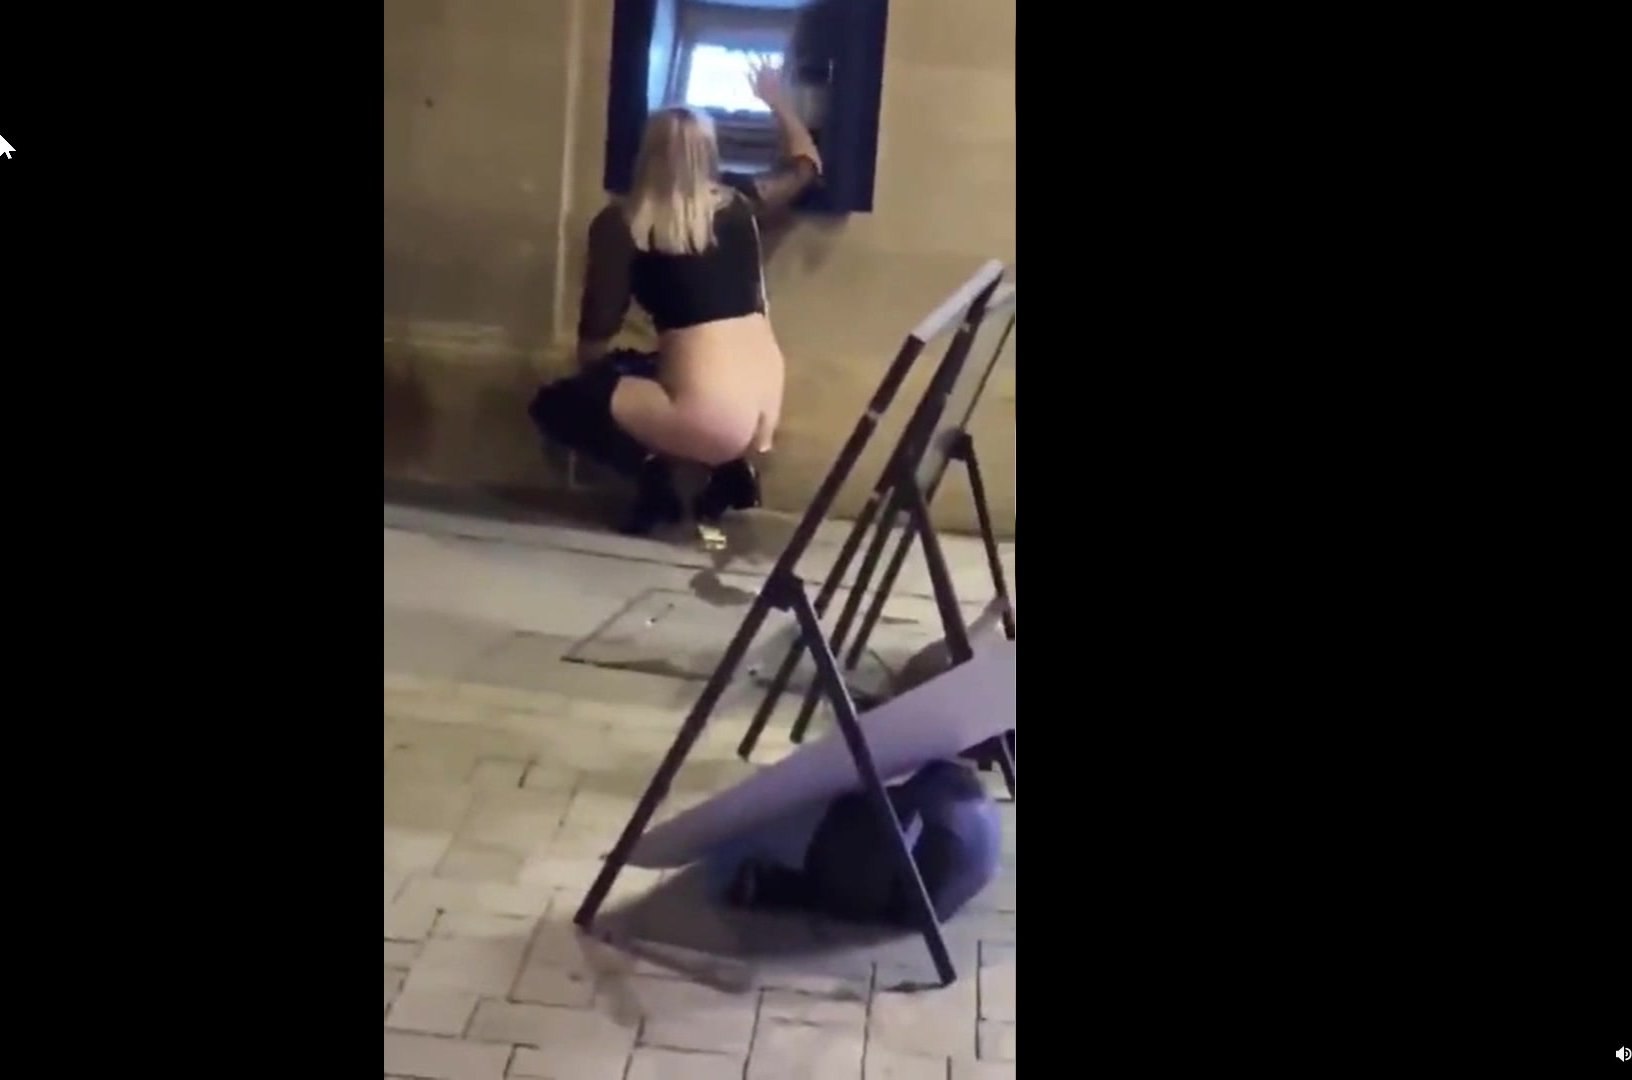 Woman peeing on the street while using ATM